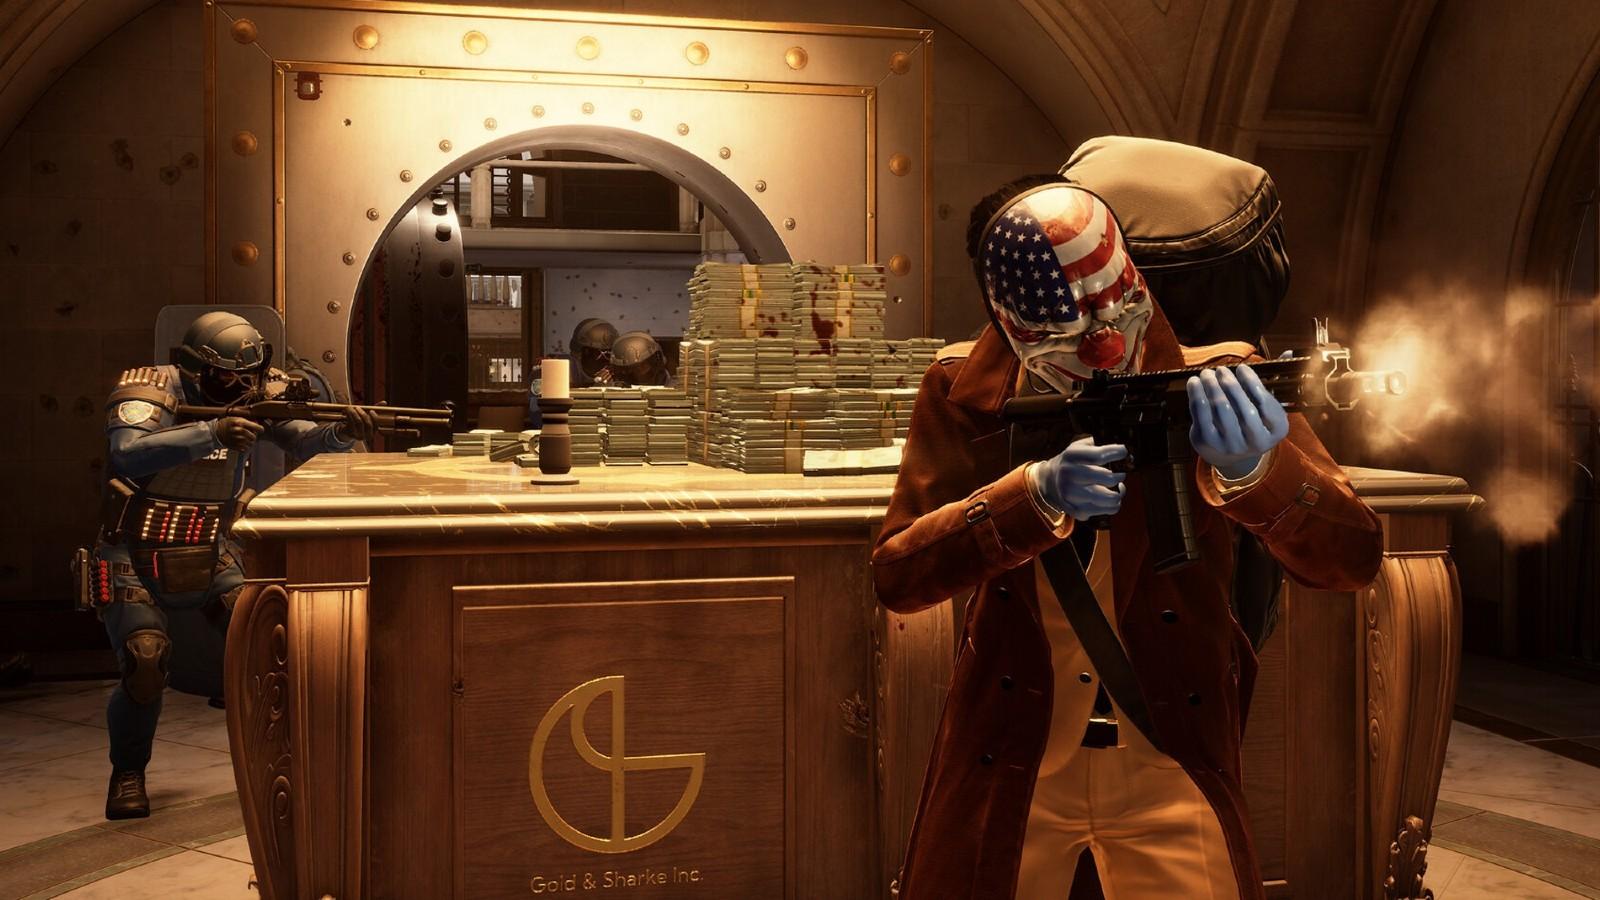 A promotional image of Payday 3 featuring players in combat.